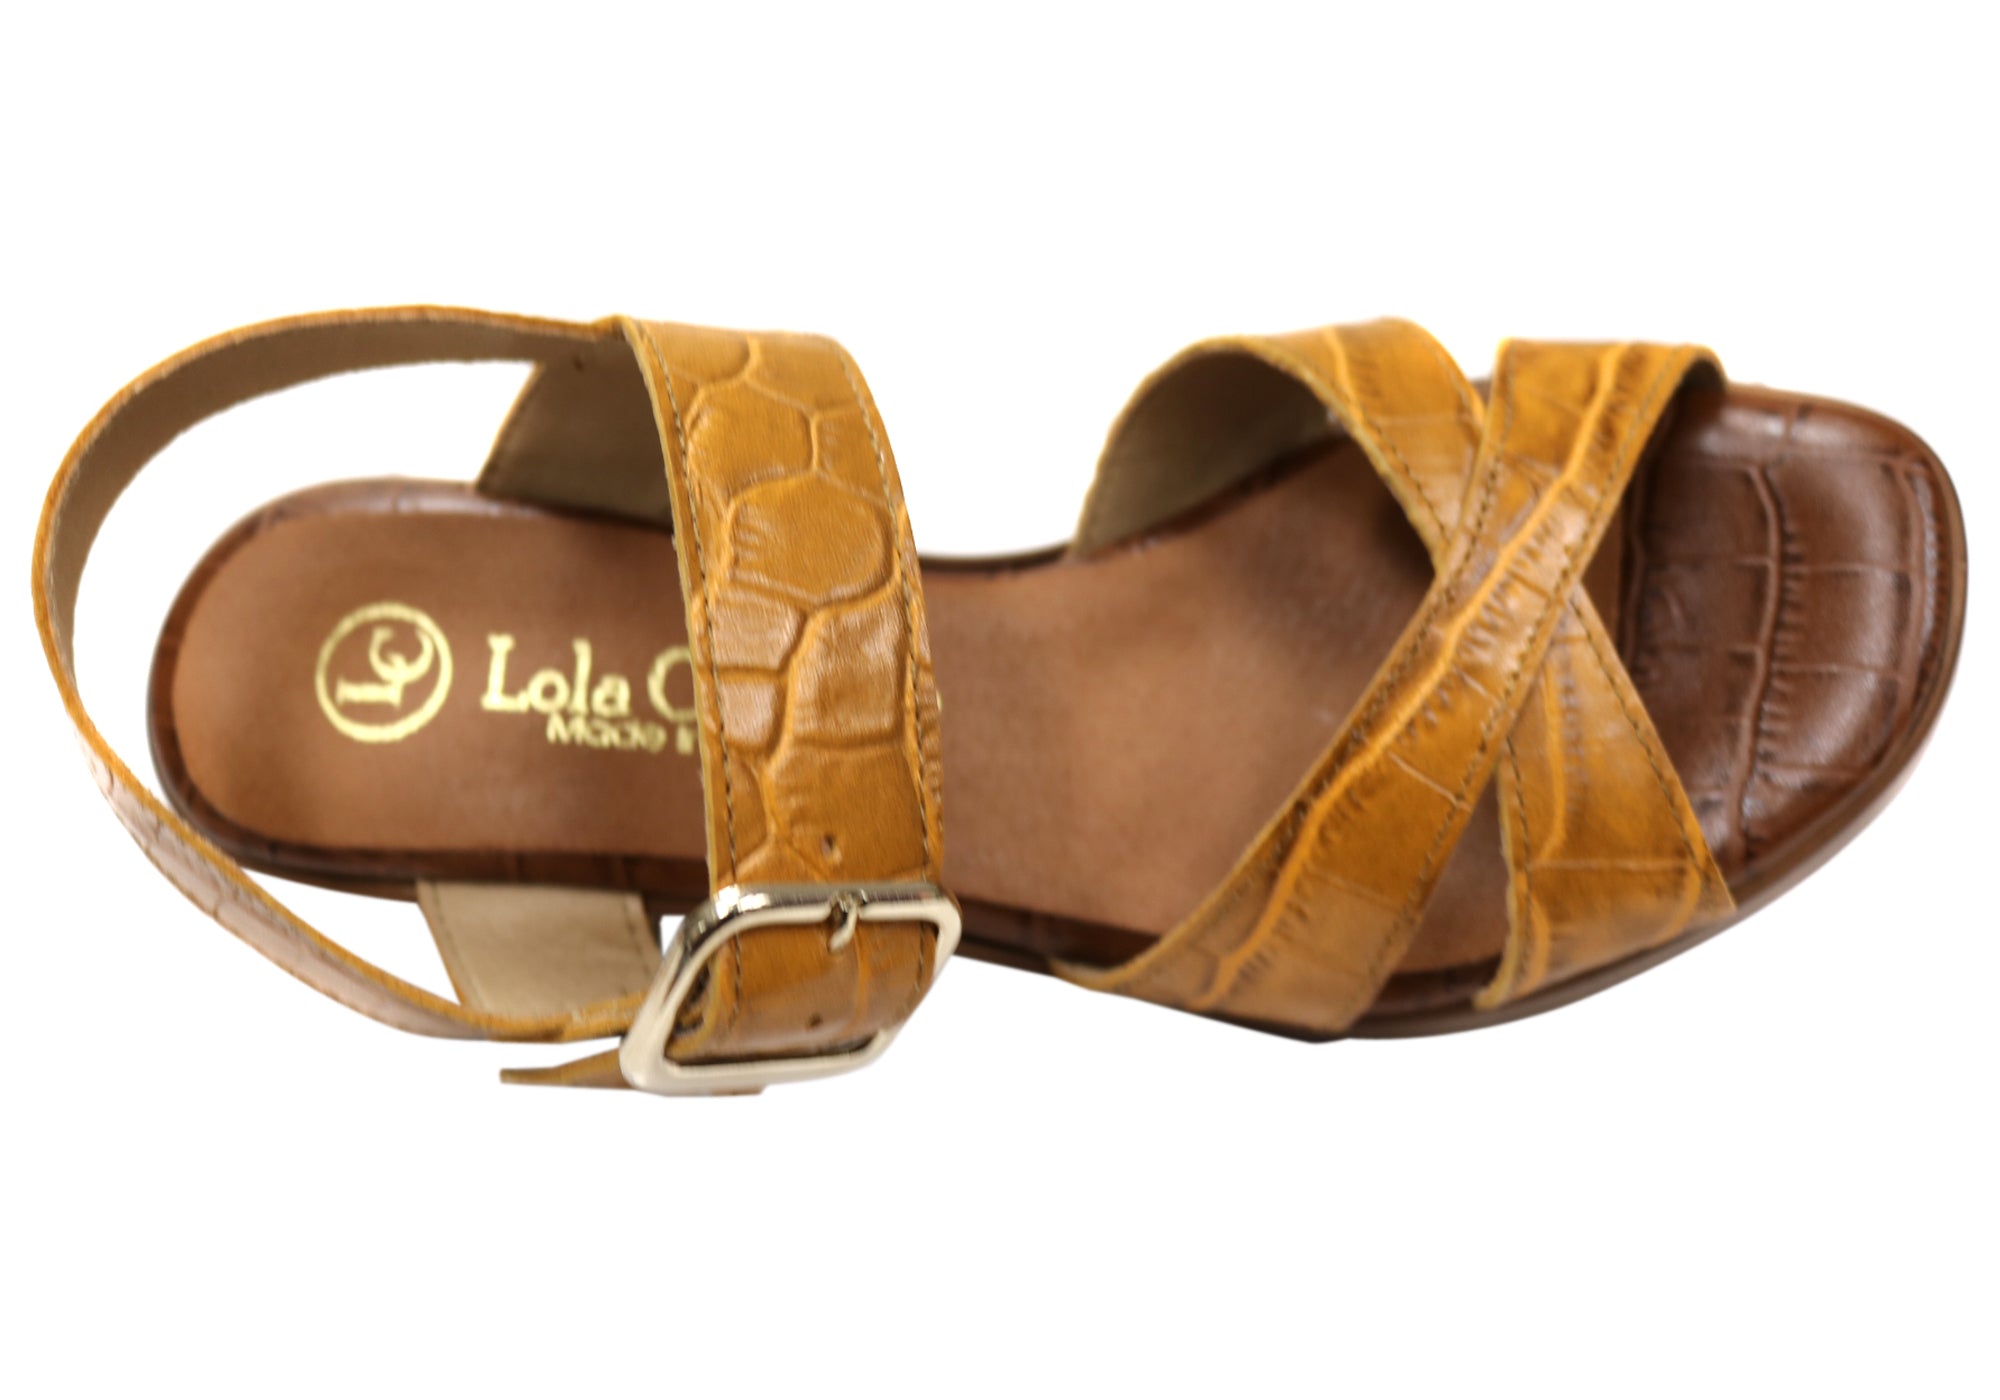 Lola Canales Rose Womens Comfort Leather Sandals Heels Made In Spain